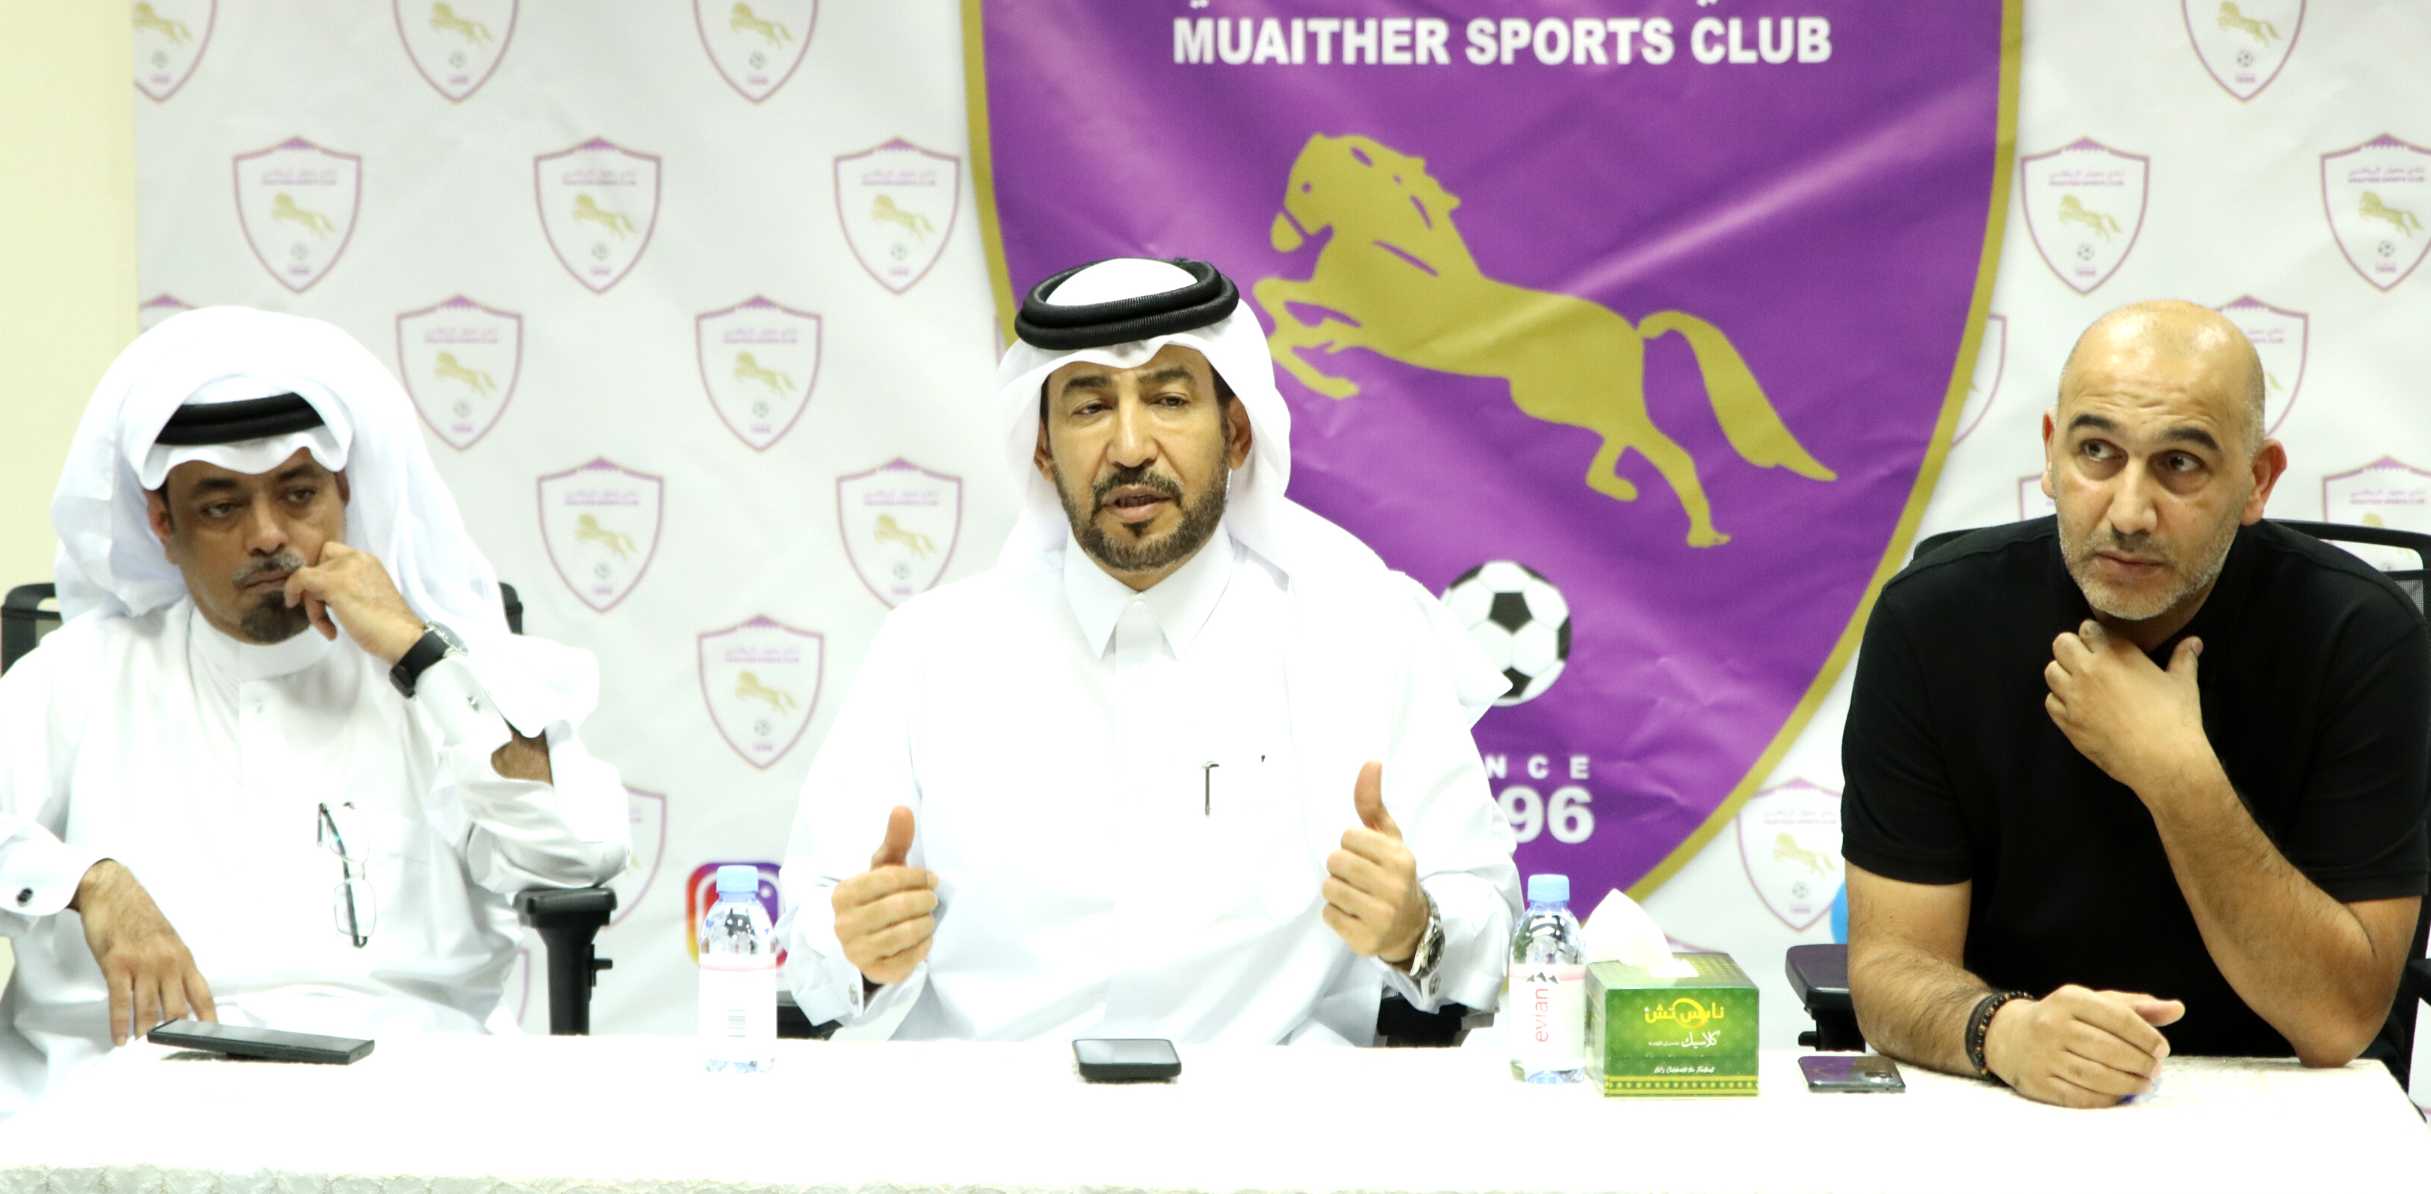 Dr. Saleh Al-Aji, club president, meets with the players before traveling to the preseason camp